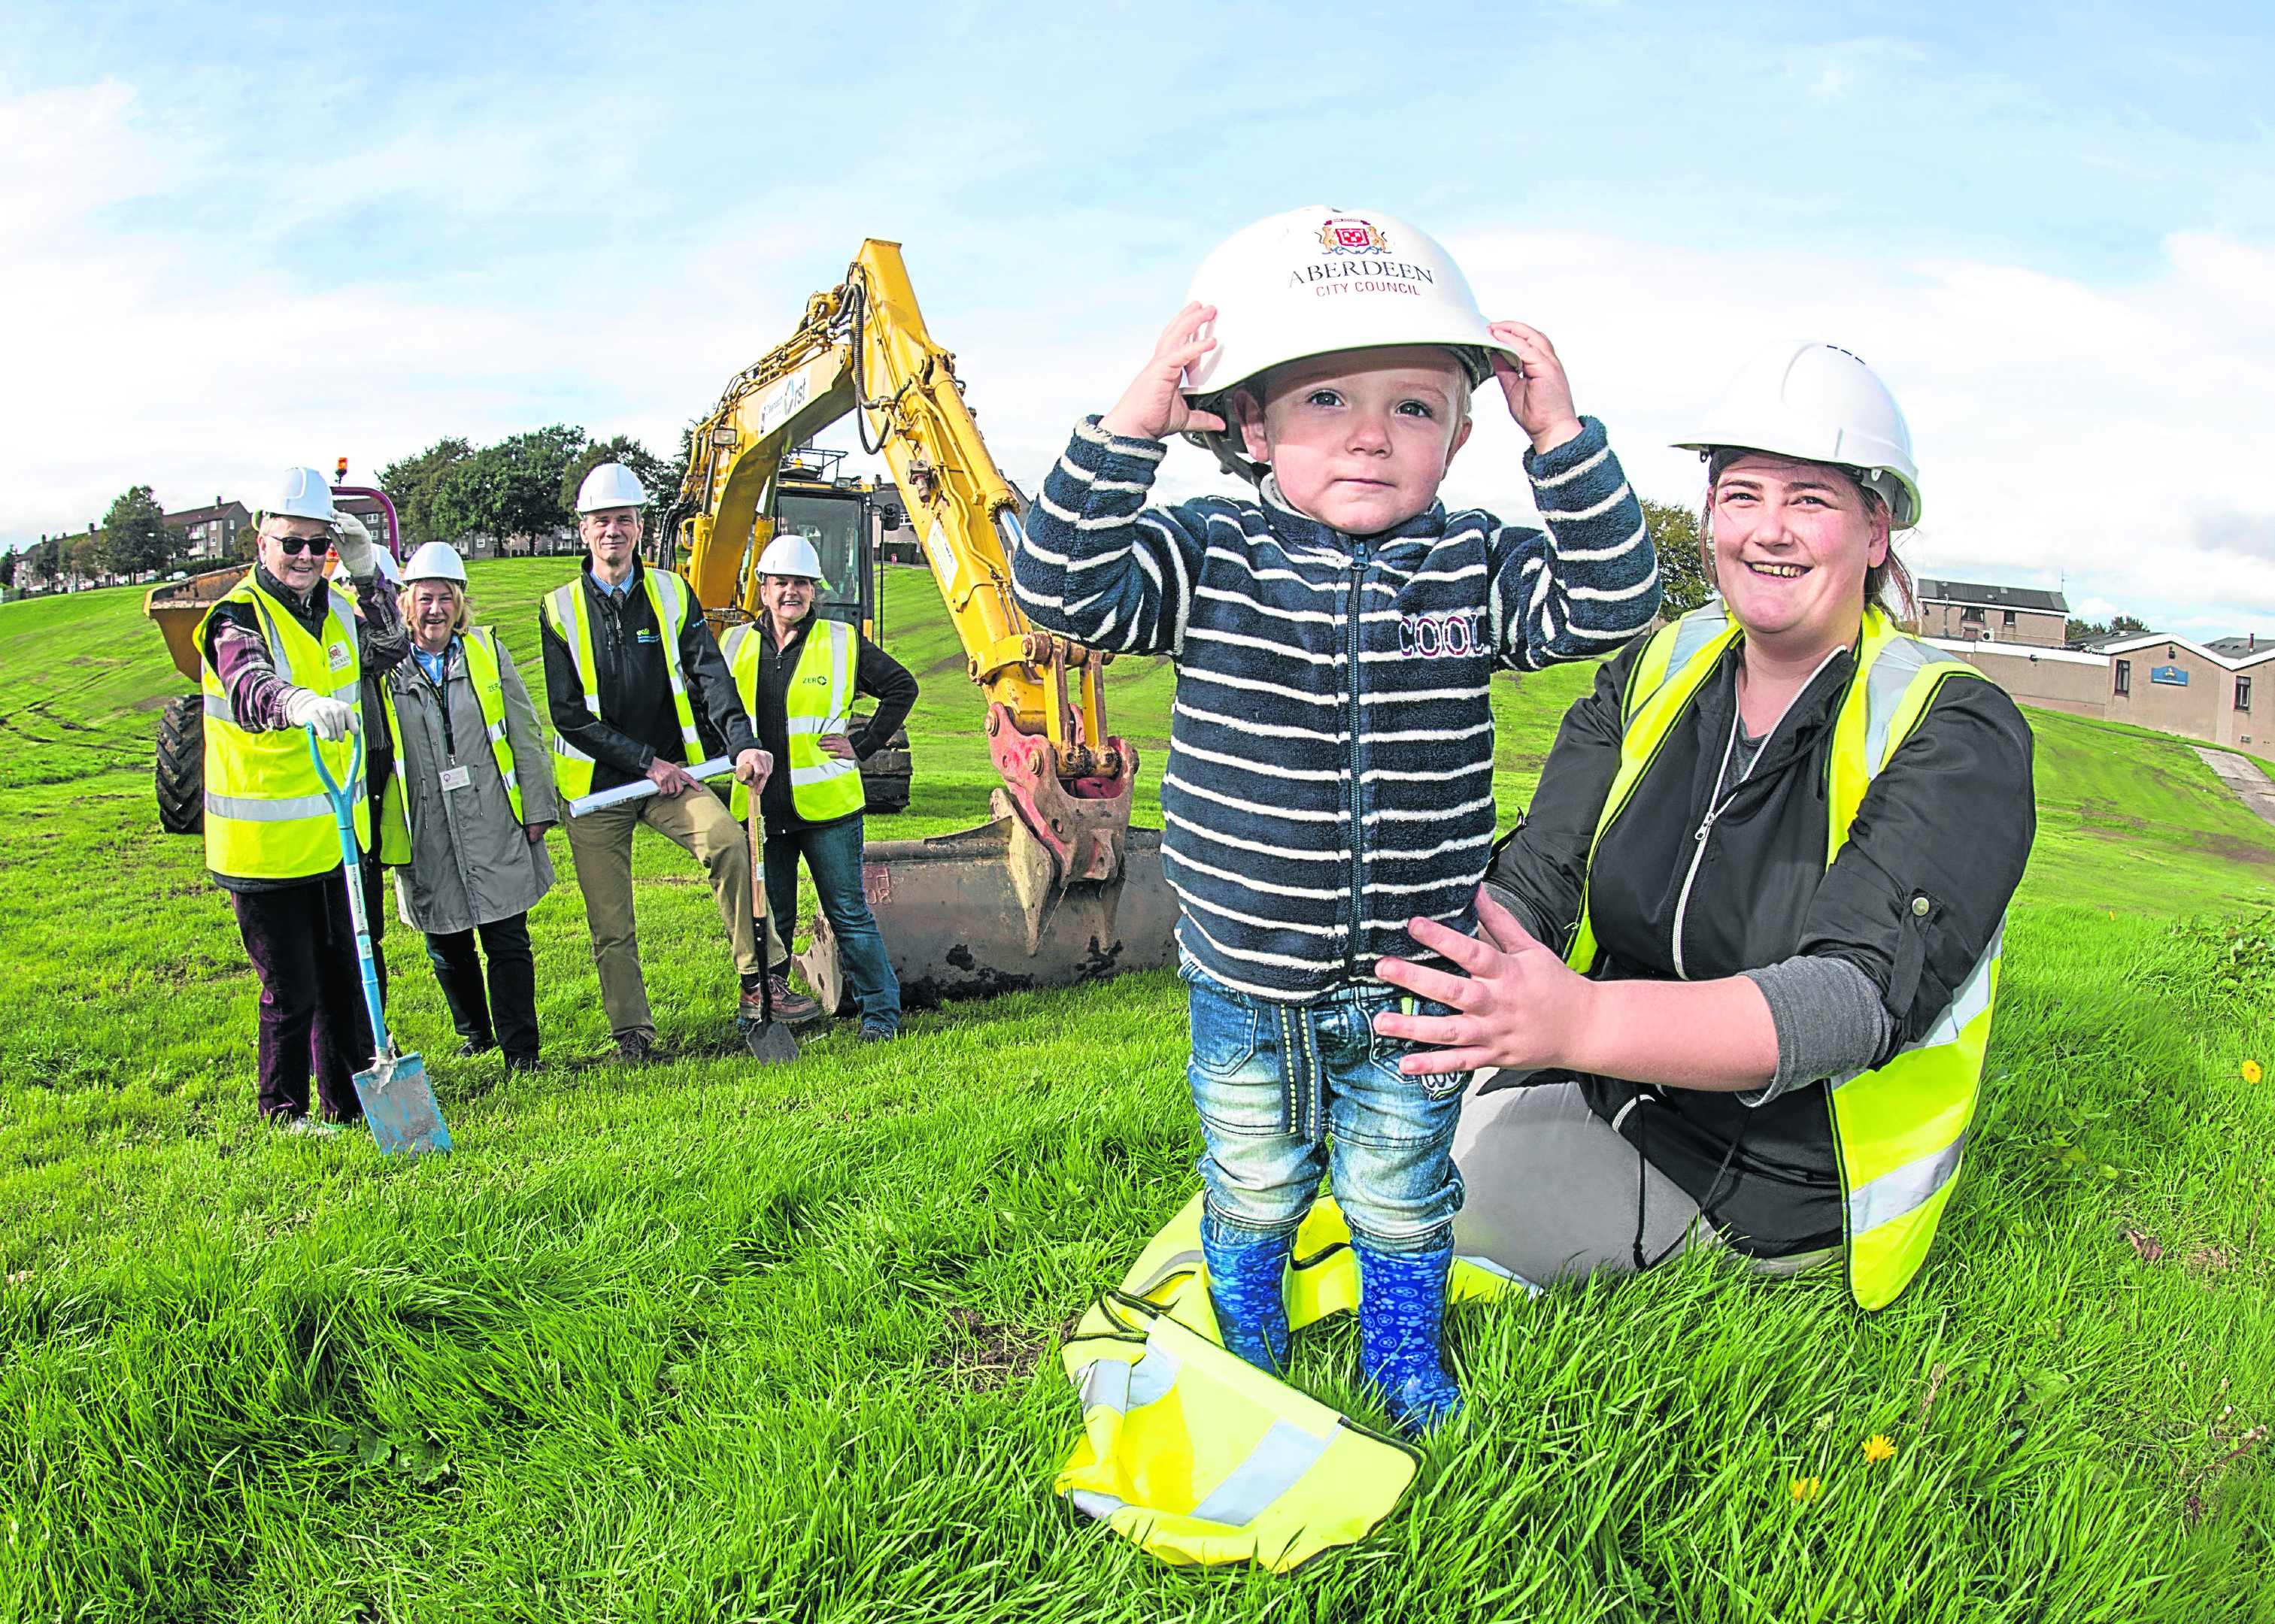 L-R Councillor Yvonne Allan, Wima Collie (Middlefiled Project steering group) Fiona Gray (member of the Steering gtroup), Gavin Clark, Marguerita Davidson (member of the seering group) with 2 year old Stephen Wilkie and Mum Kasie Maitland.